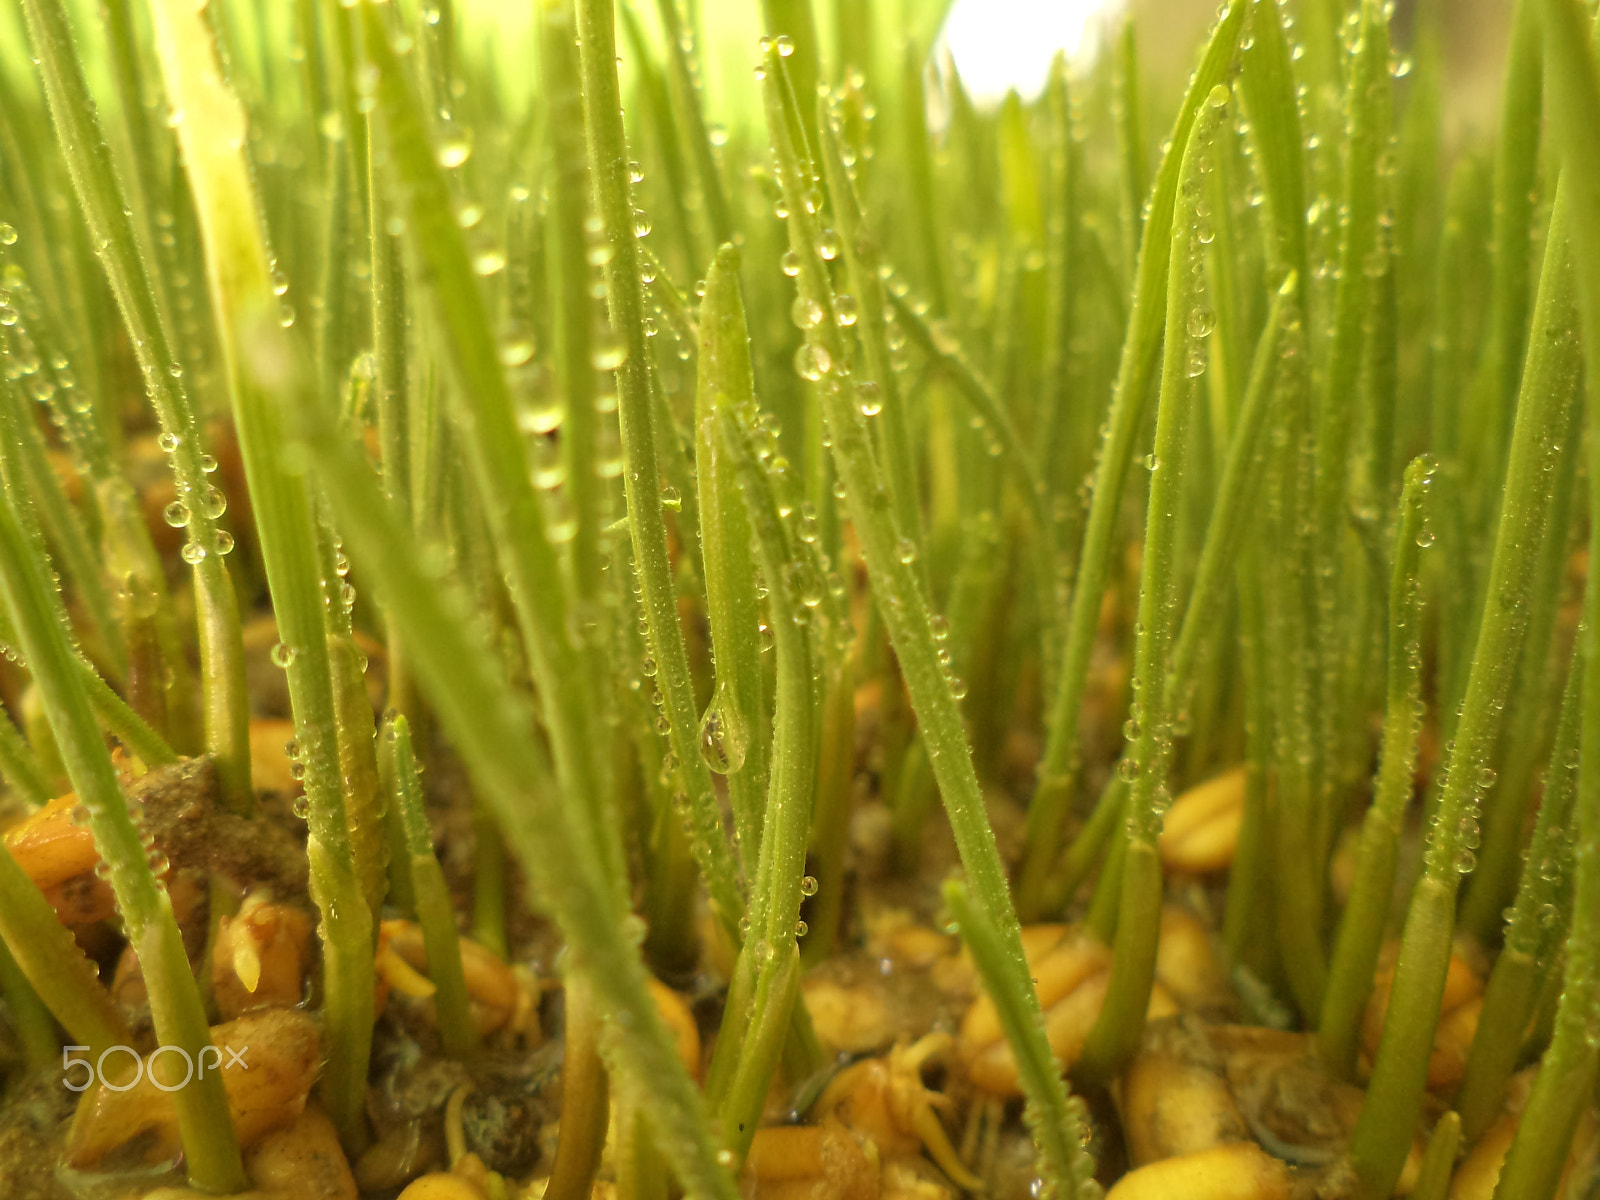 Sony DSC-S3000 sample photo. Water droplets on wheat grass photography